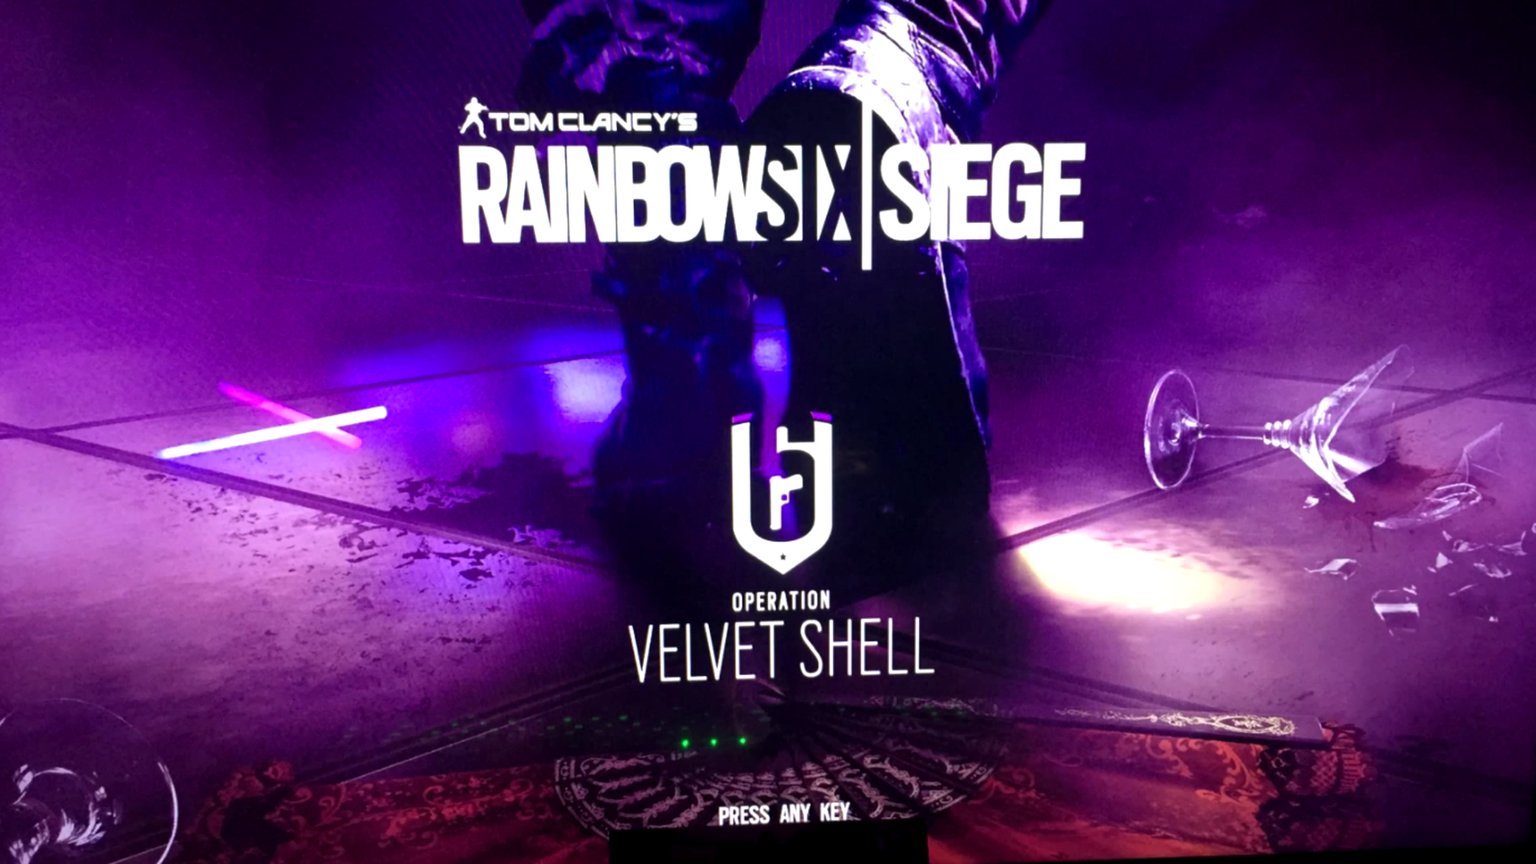 The Clancy Report Operation Velvet Shell Loading Screen For Rainbow Six Siege Via Pulseislove Rainbowsixsiege Rainbowsix Velvetshell T Co Wf5xlmvnch Twitter